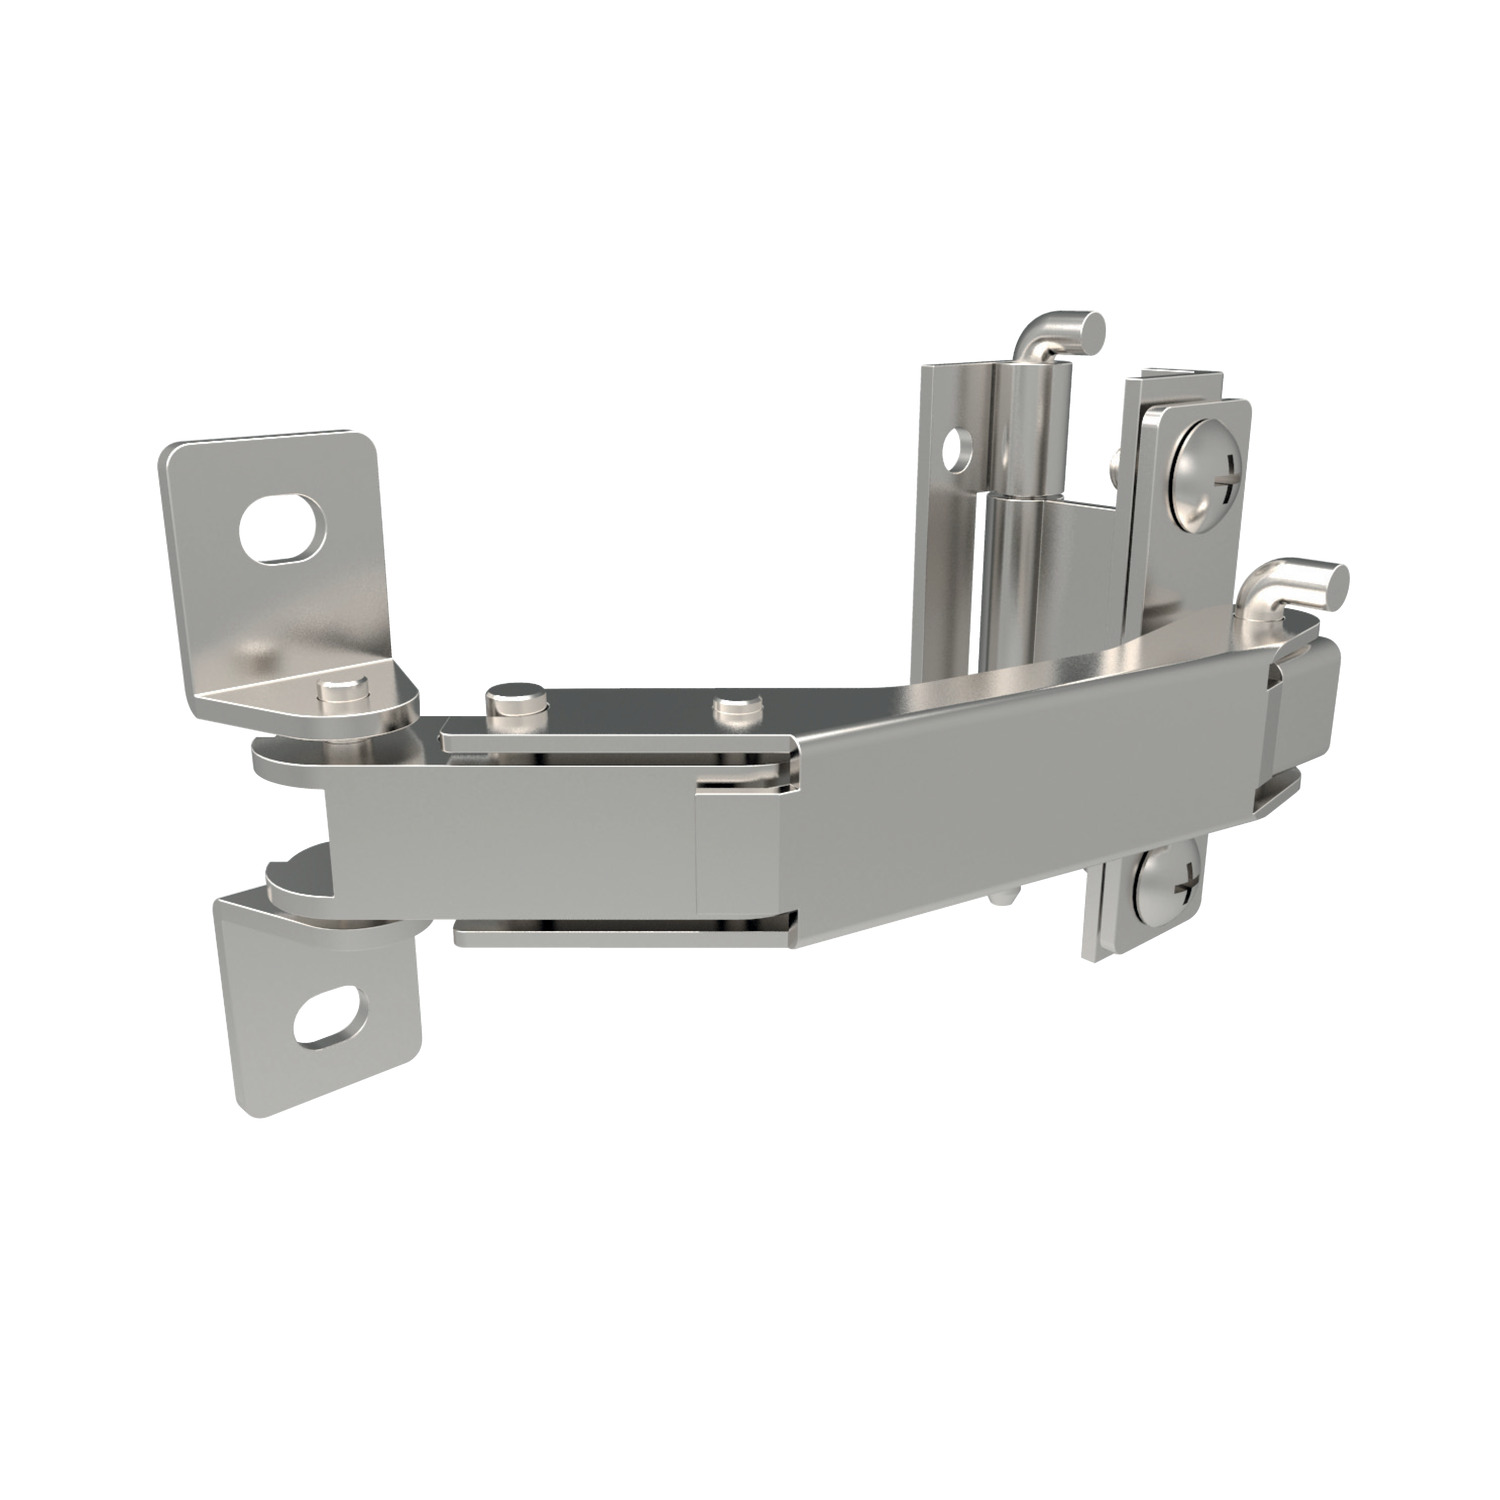 S2250 Concealed Pivot Hinges - Integral Stay